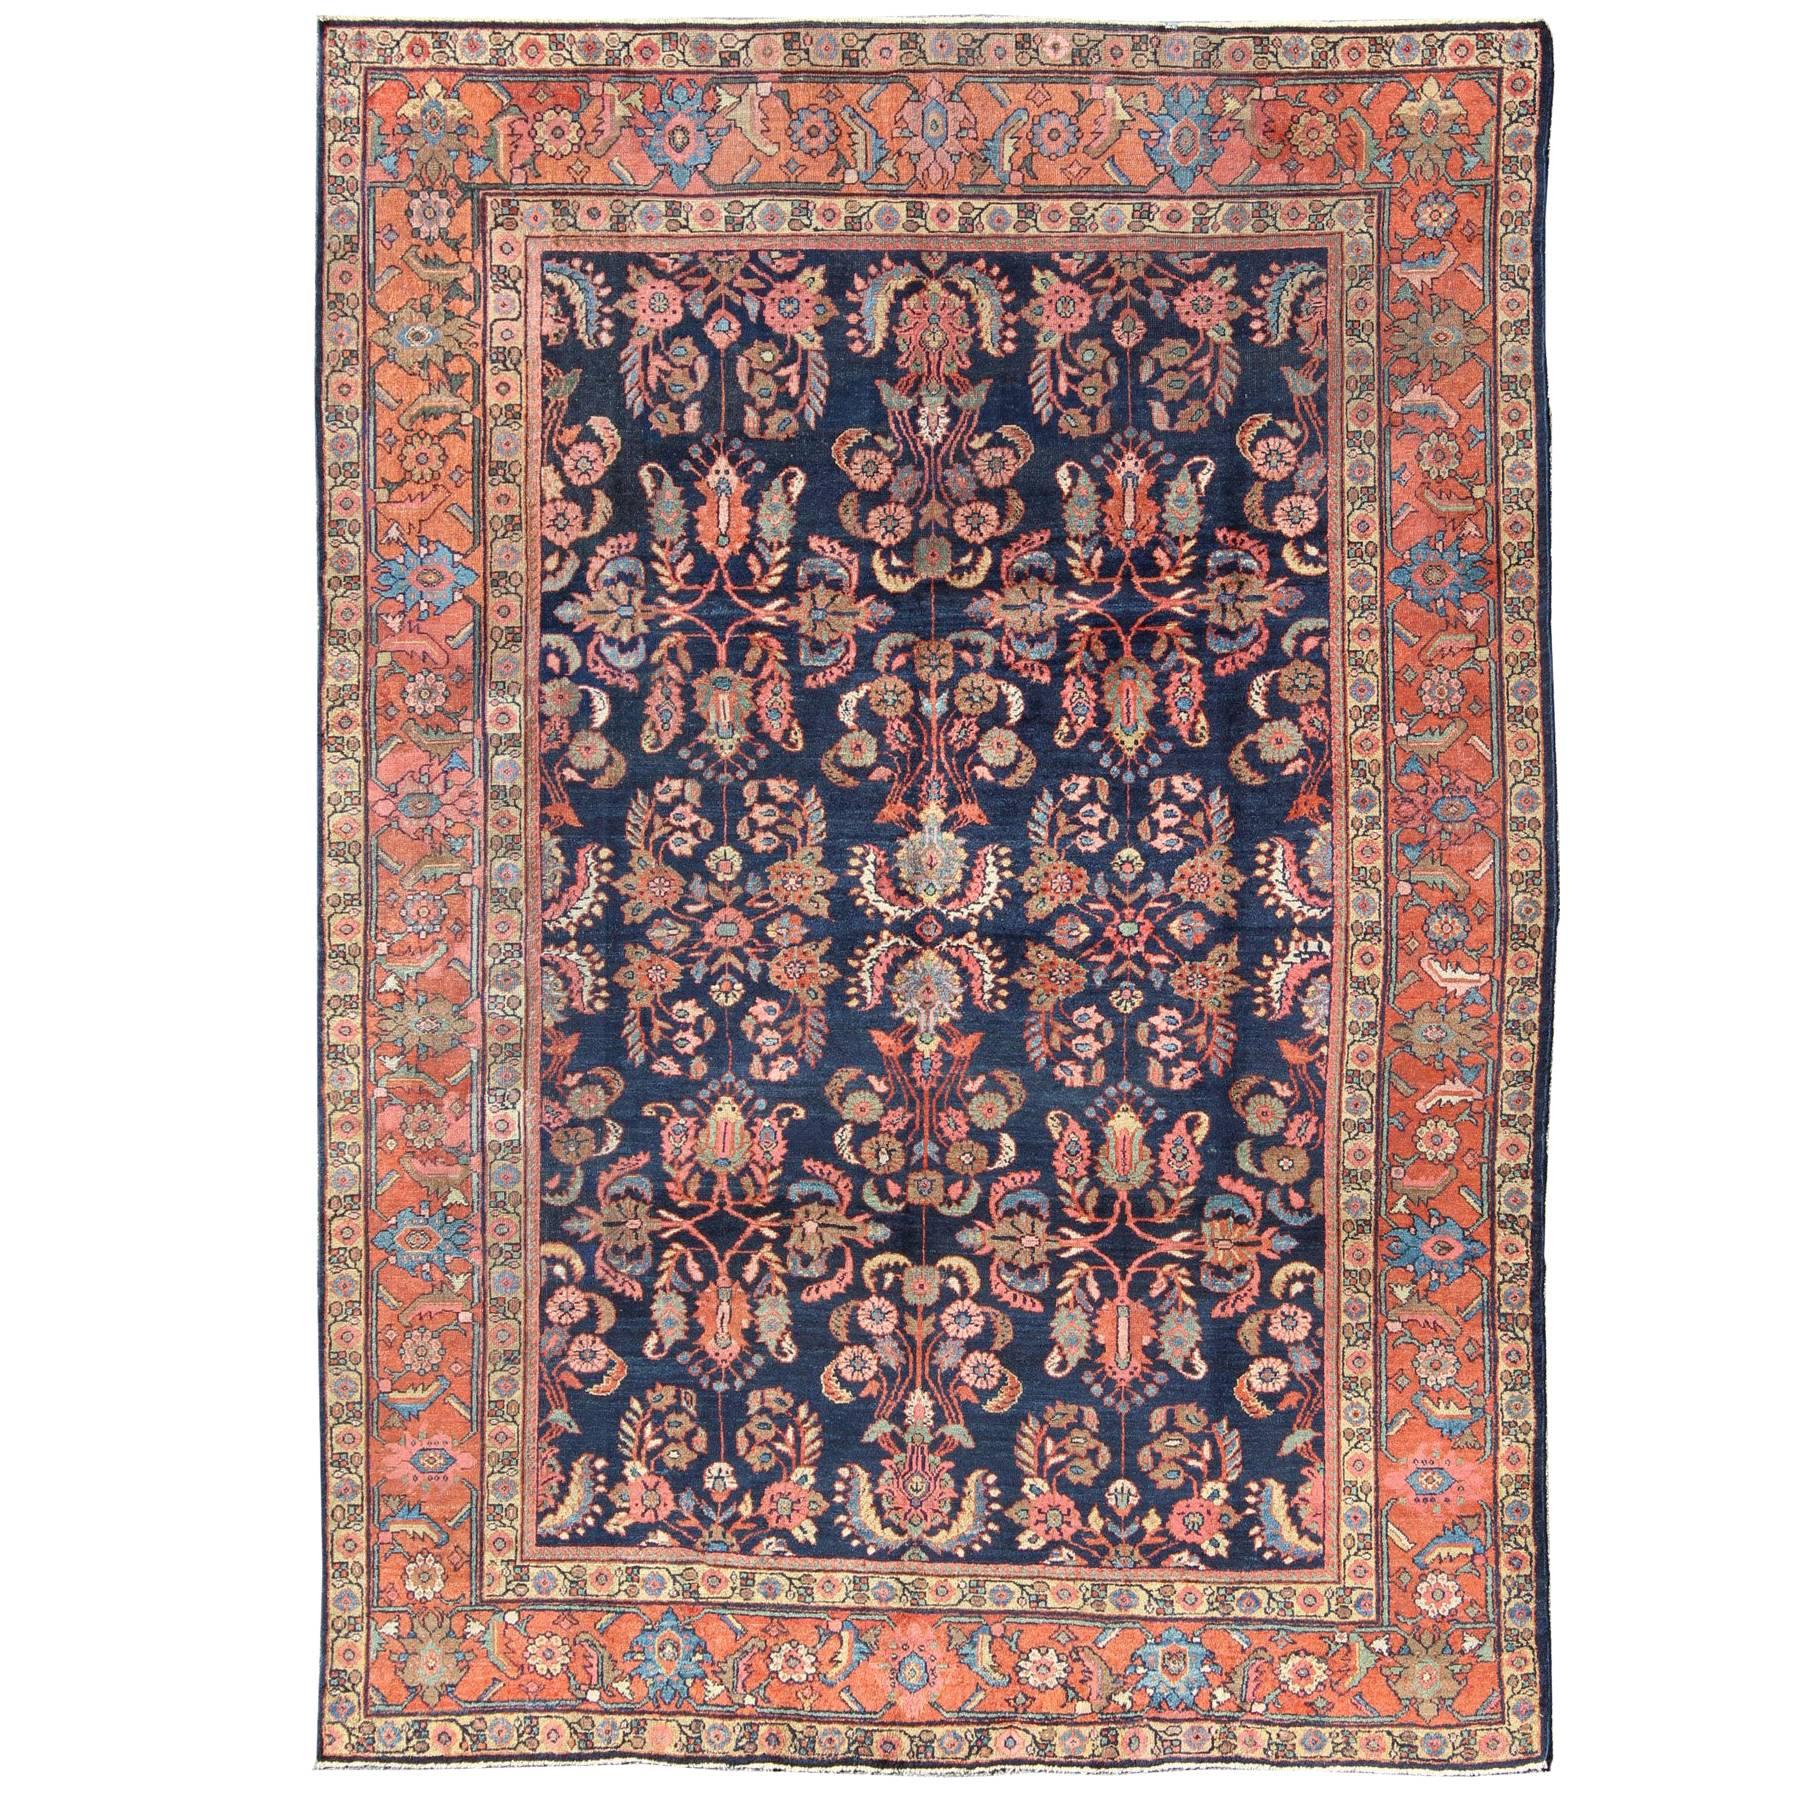  Antique Mahal Rug with Dark Blue Field & Coral Red Border with Floral Motifs For Sale